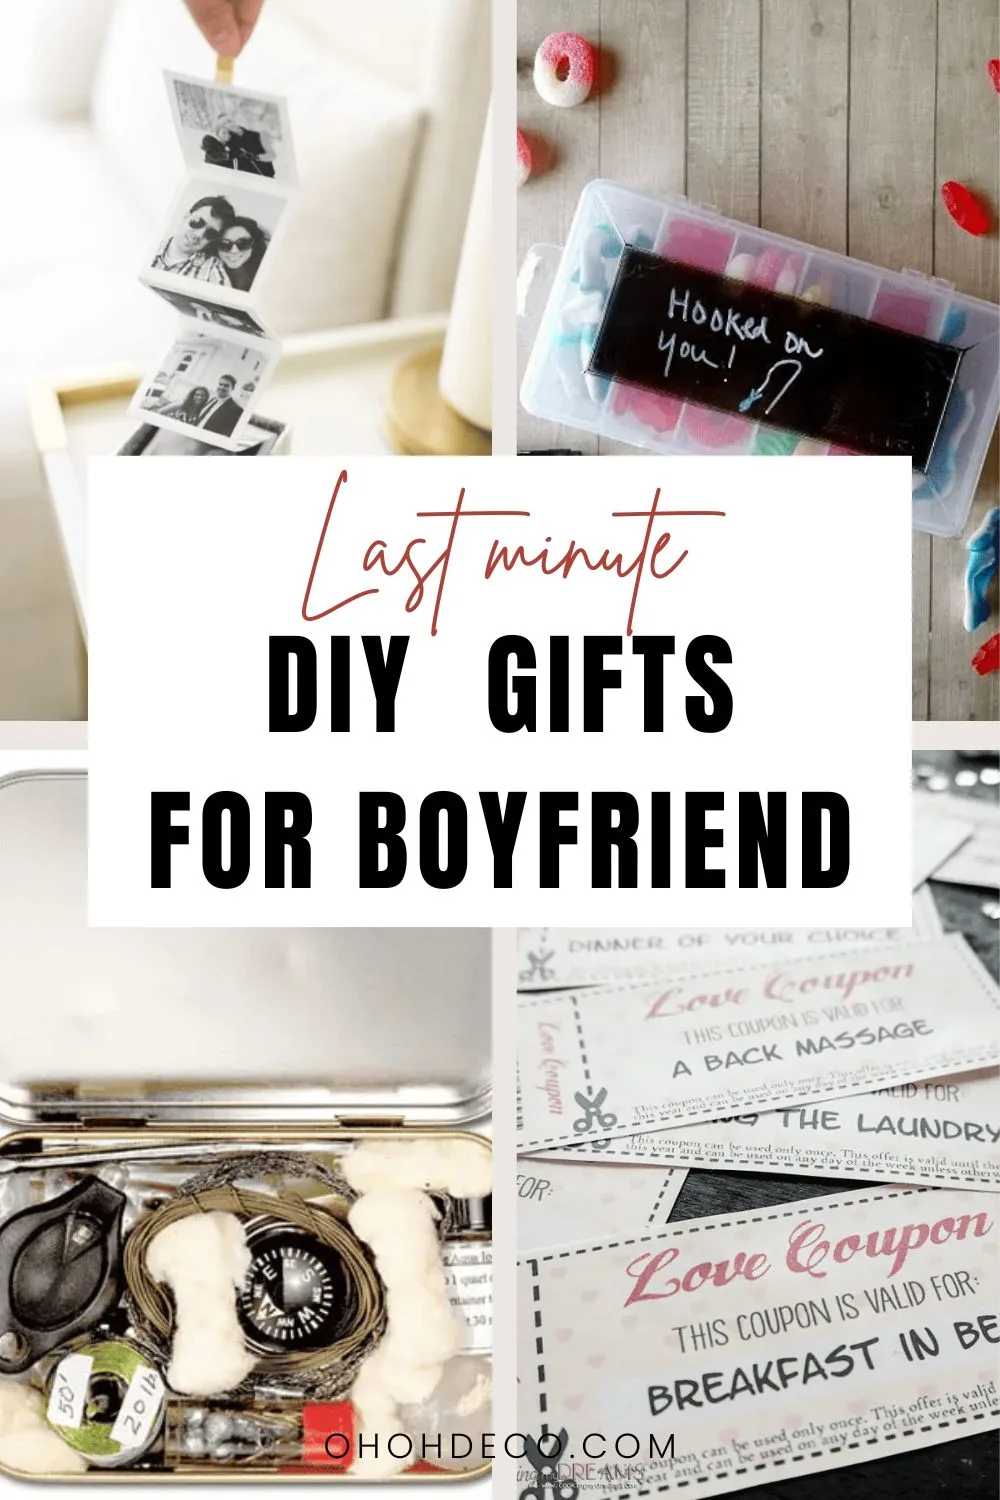 LAST MINUTE DIY GIFT IDEA | FREE PRINTABLE GIFT WRAP - Southern Revivals